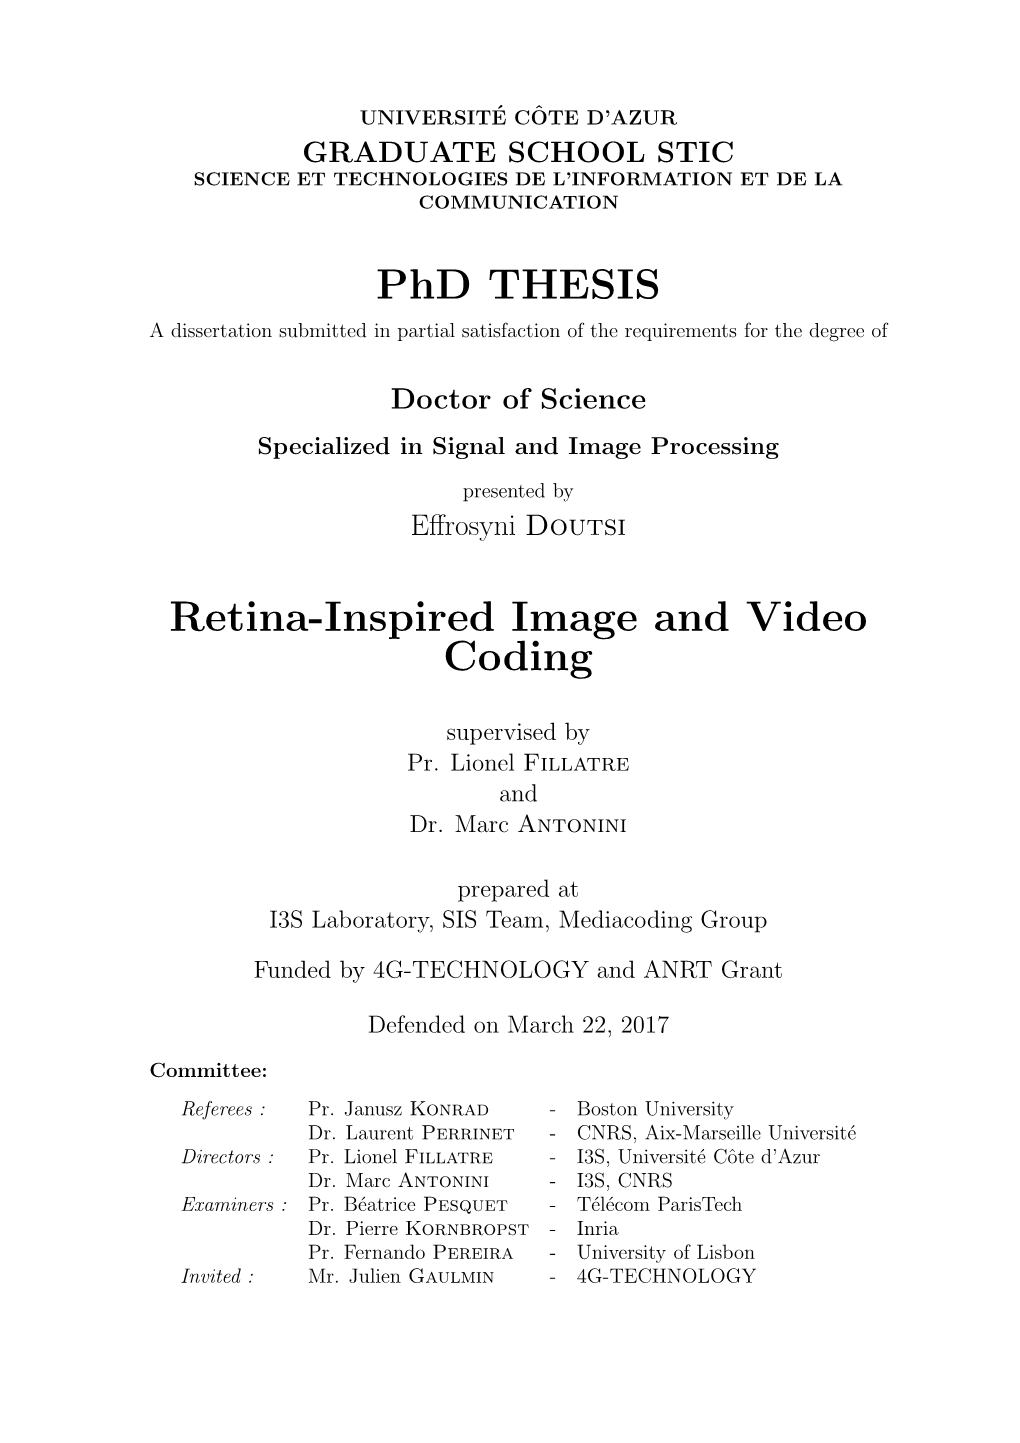 Phd THESIS Retina-Inspired Image and Video Coding